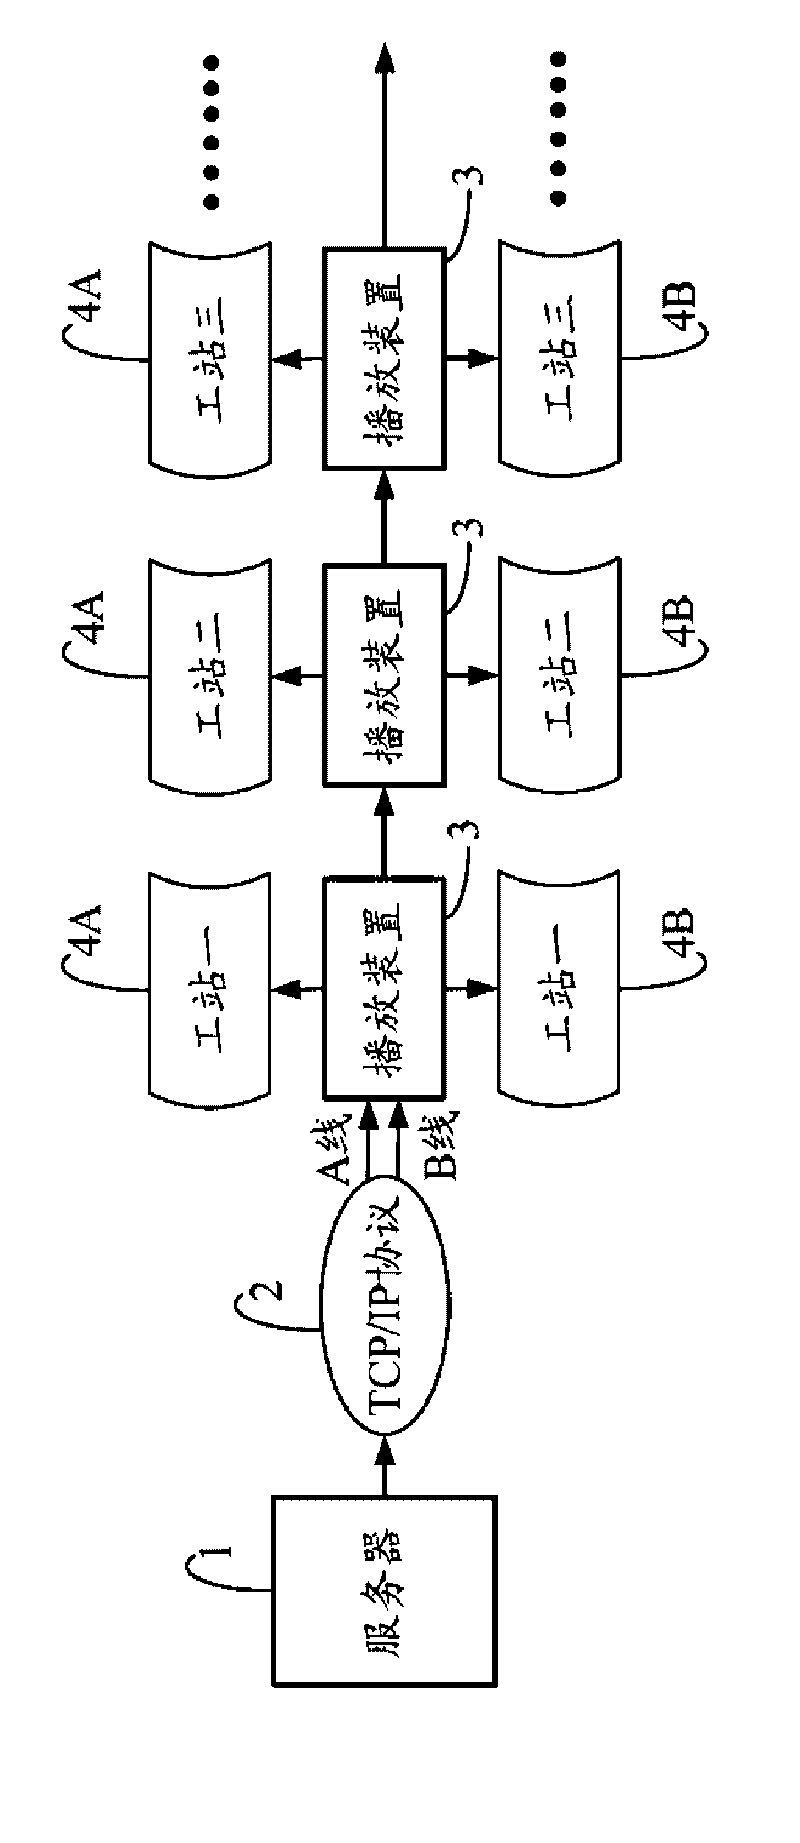 Standard operating procedure playing system and method